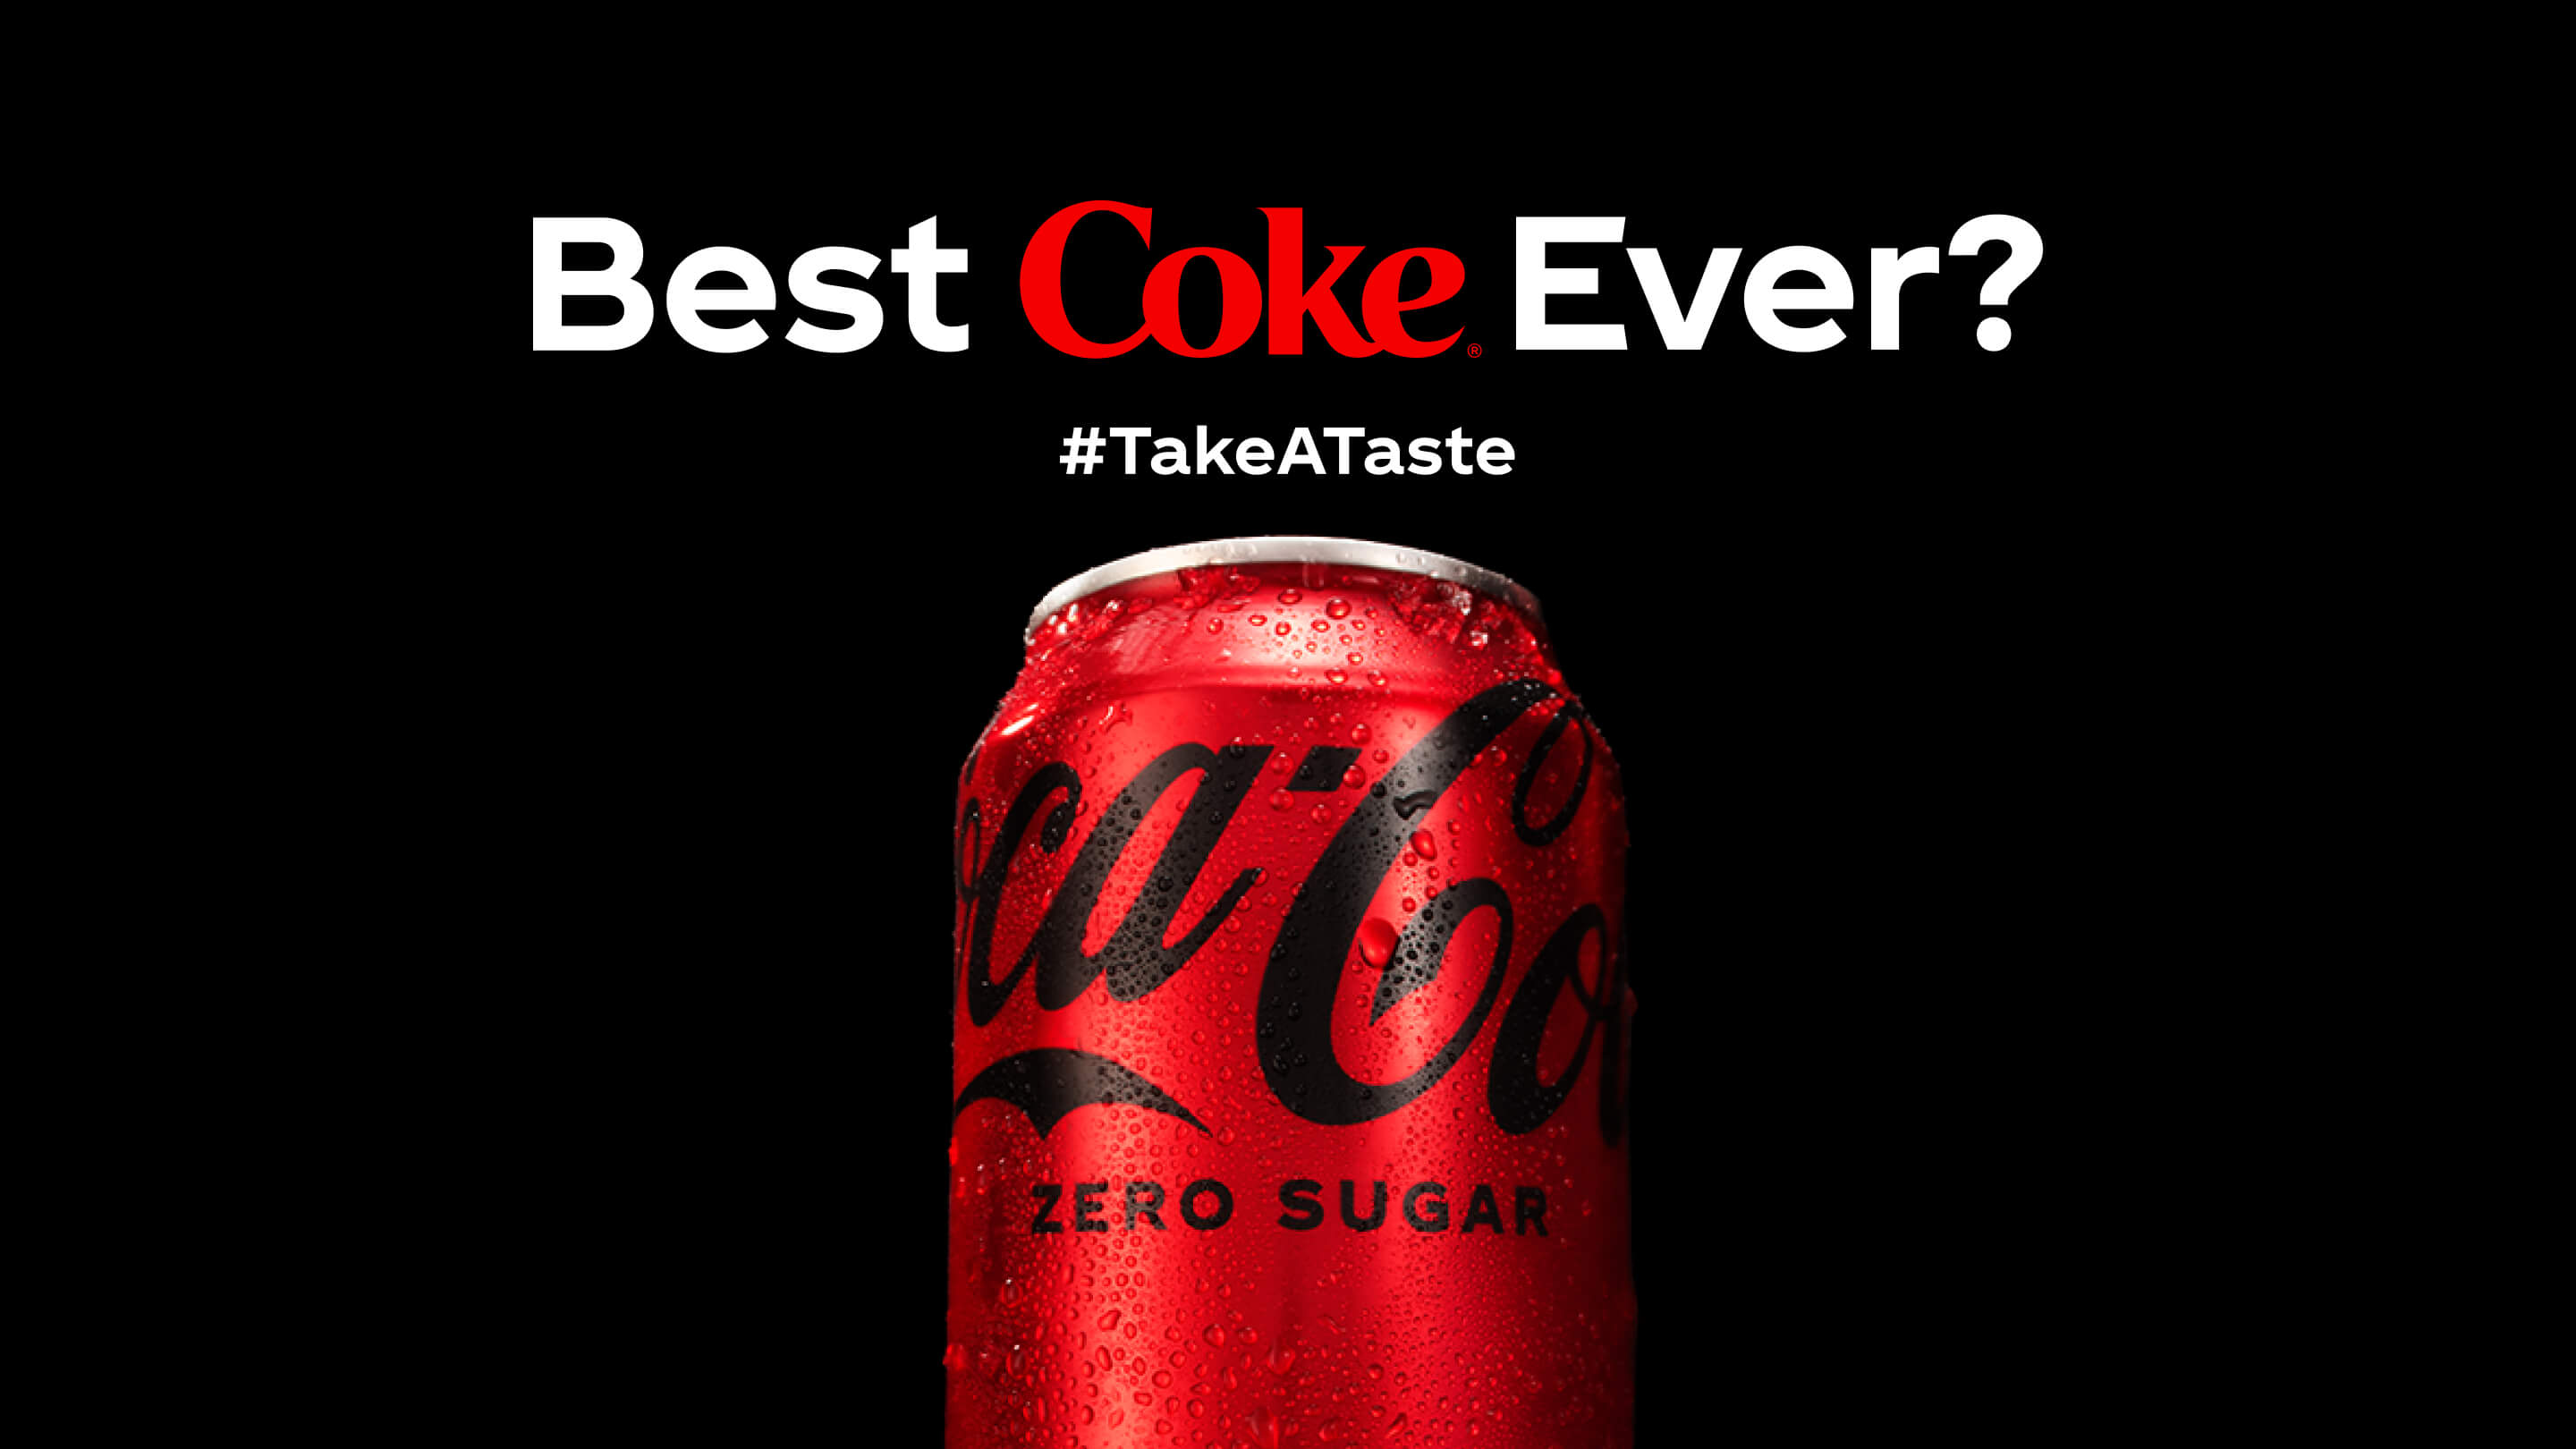 Detail of a Coca-Cola Zero Sugar can on black background with the phrase "Best Coke Ever? #TakeATaste"